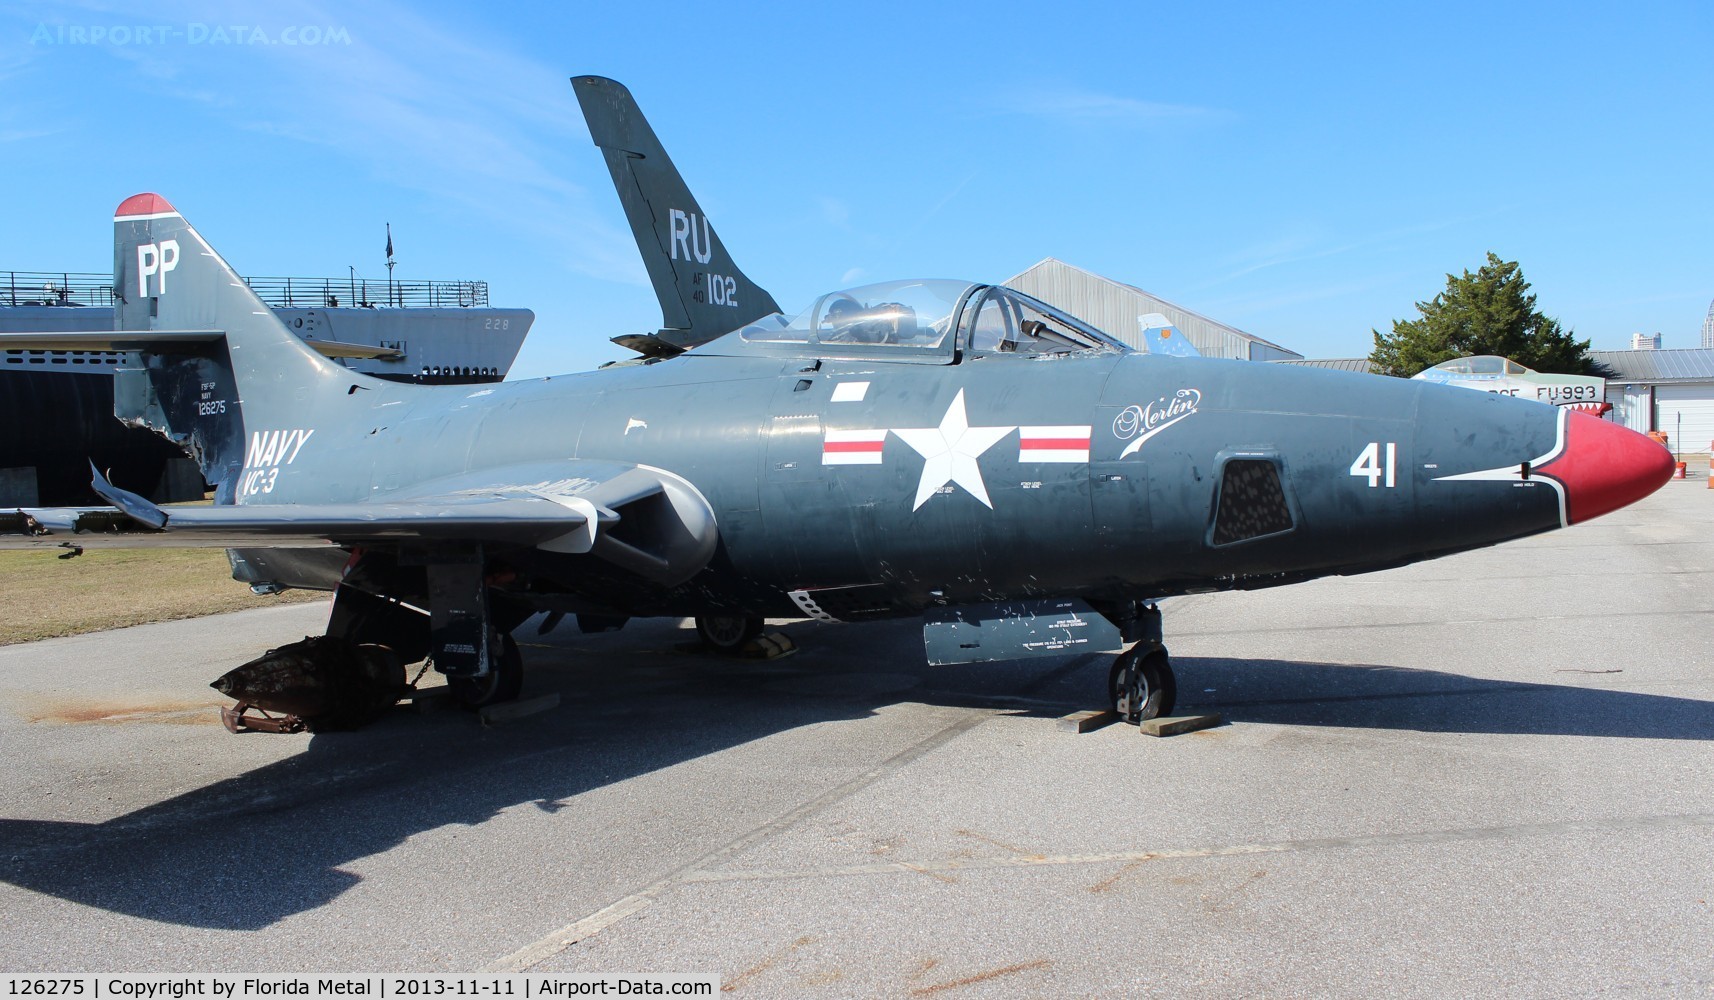 126275, 1950 Grumman F9F-5P Panther C/N Not found 126275, F9F-5P Panther at Battleship Alabama with some damage to it from Hurricanes Ivan and Katrina